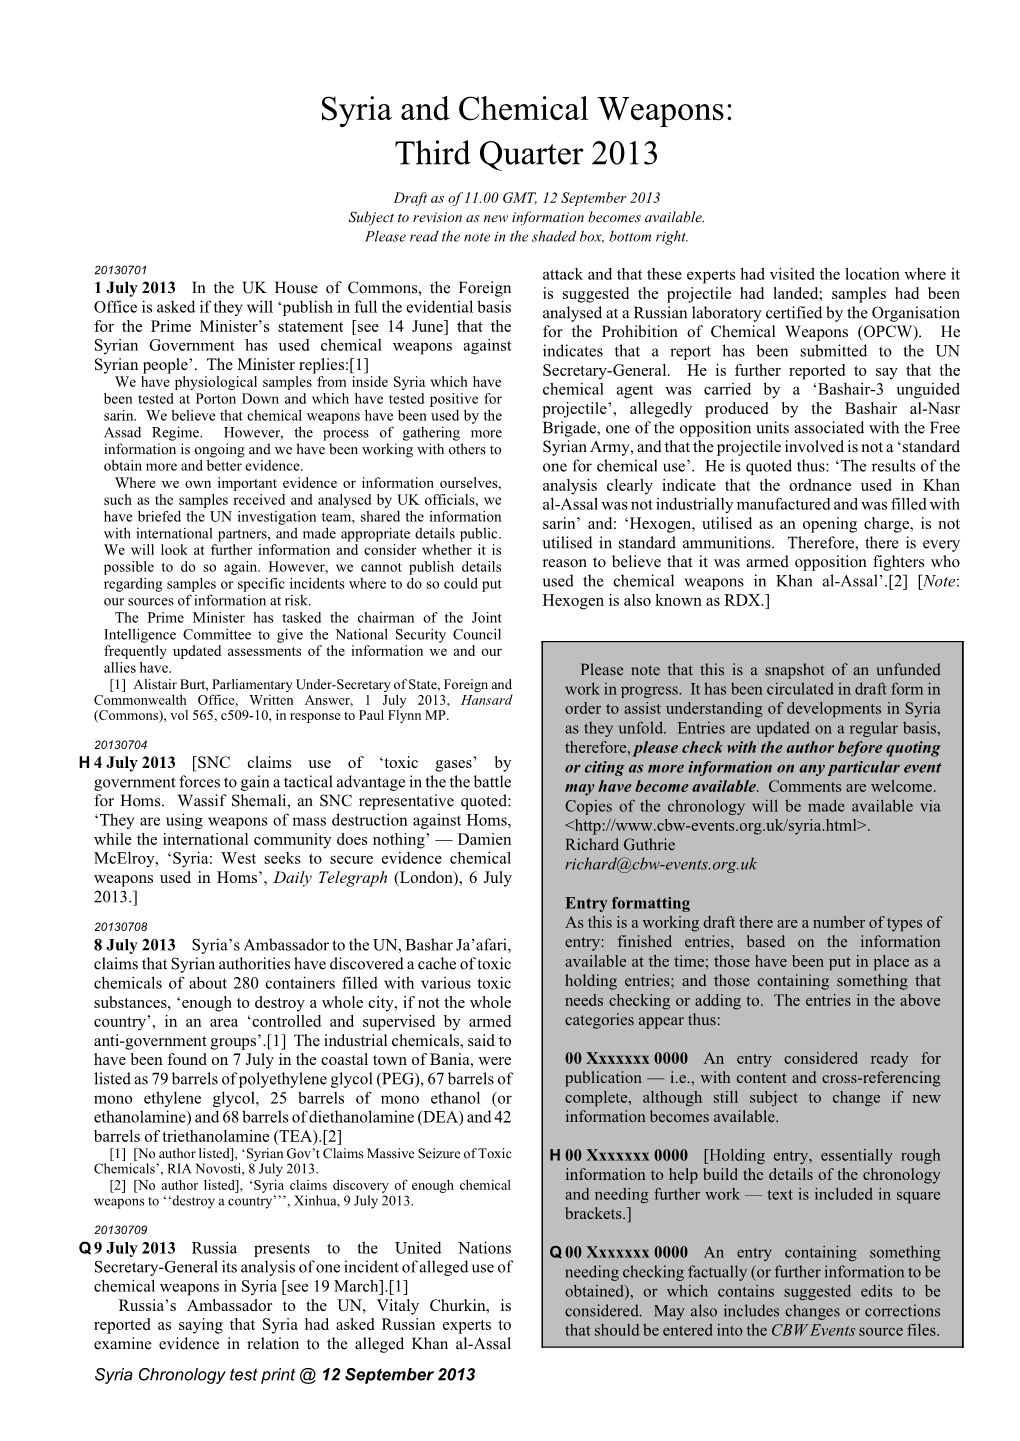 Syria and Chemical Weapons: Third Quarter 2013